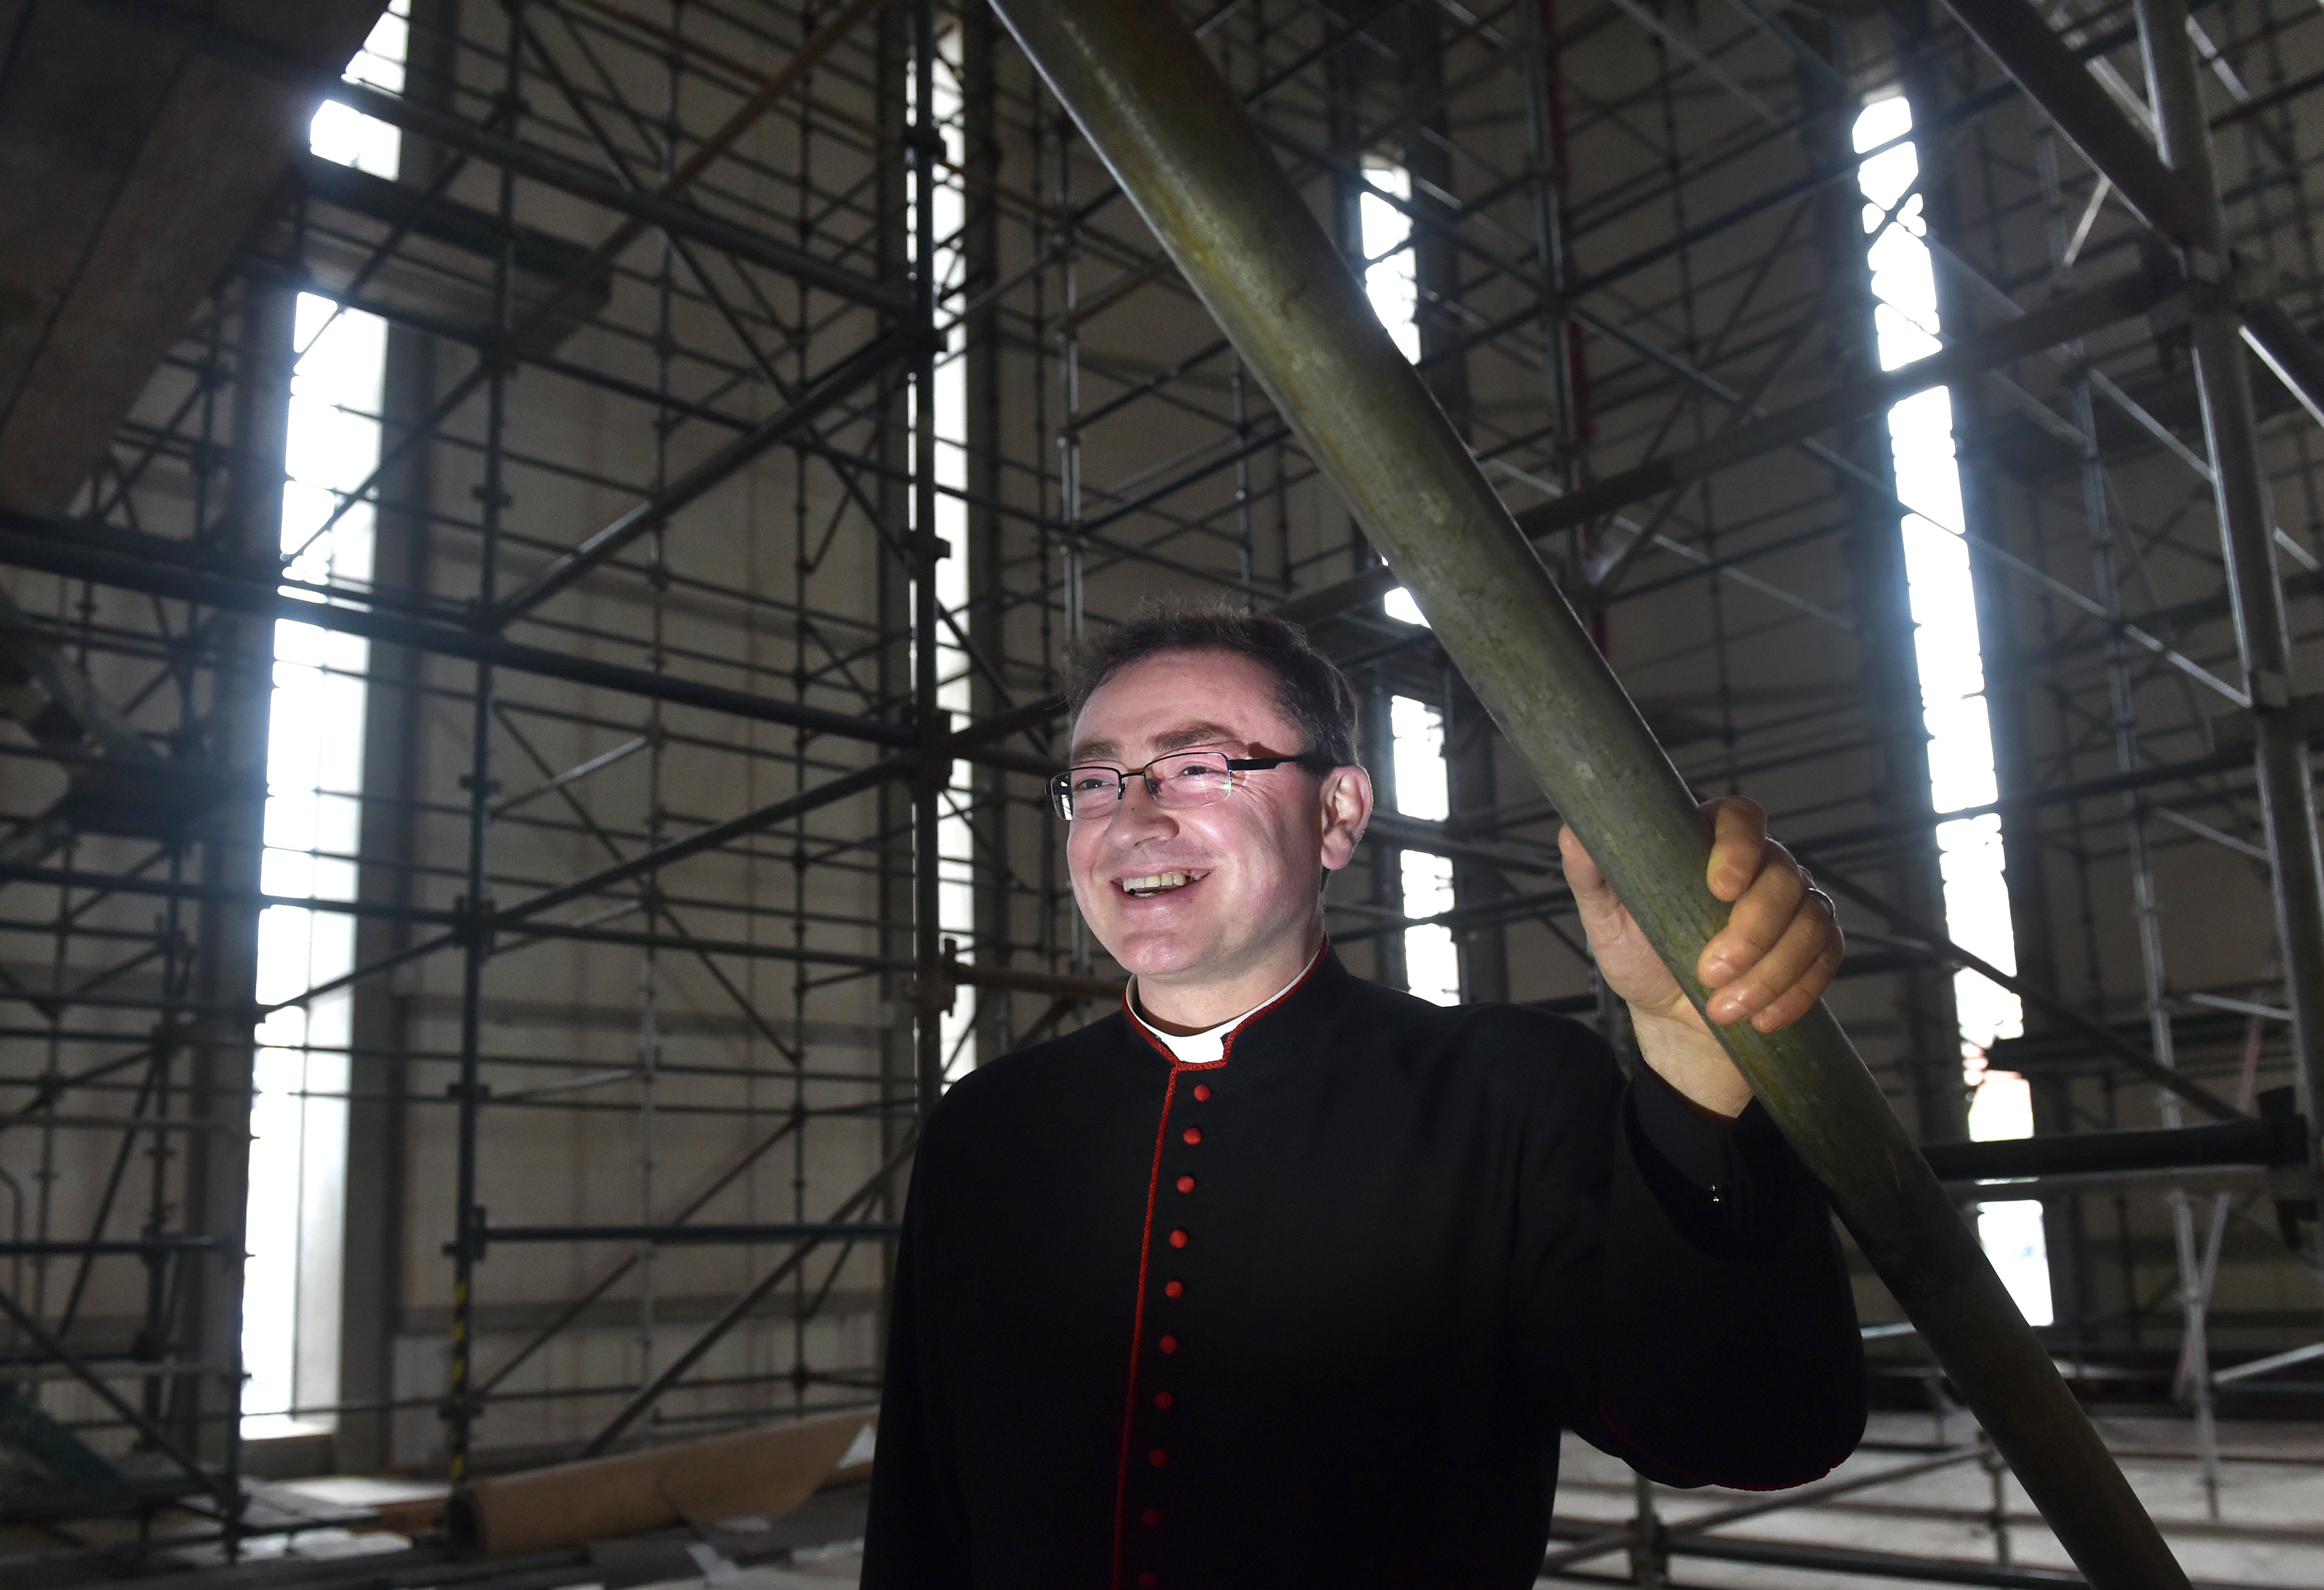 The Dean of St Paul’s Cathedral, the Very Rev Dr Tony Curtis stands among scaffolding in the...